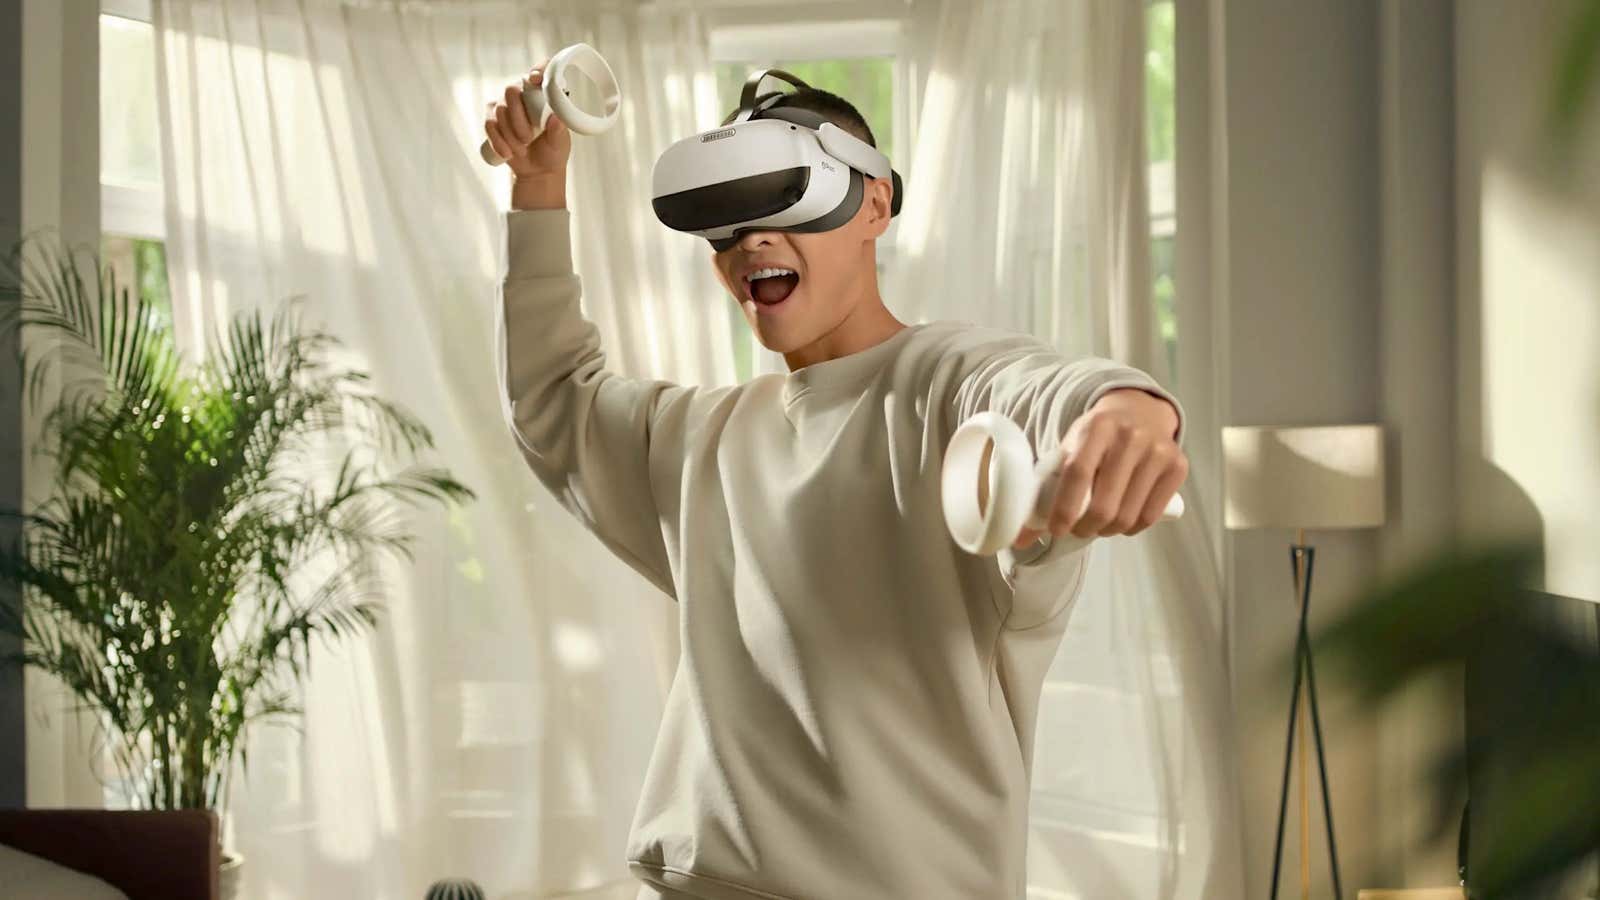 A user wearing the Pico VR headset from ByteDance